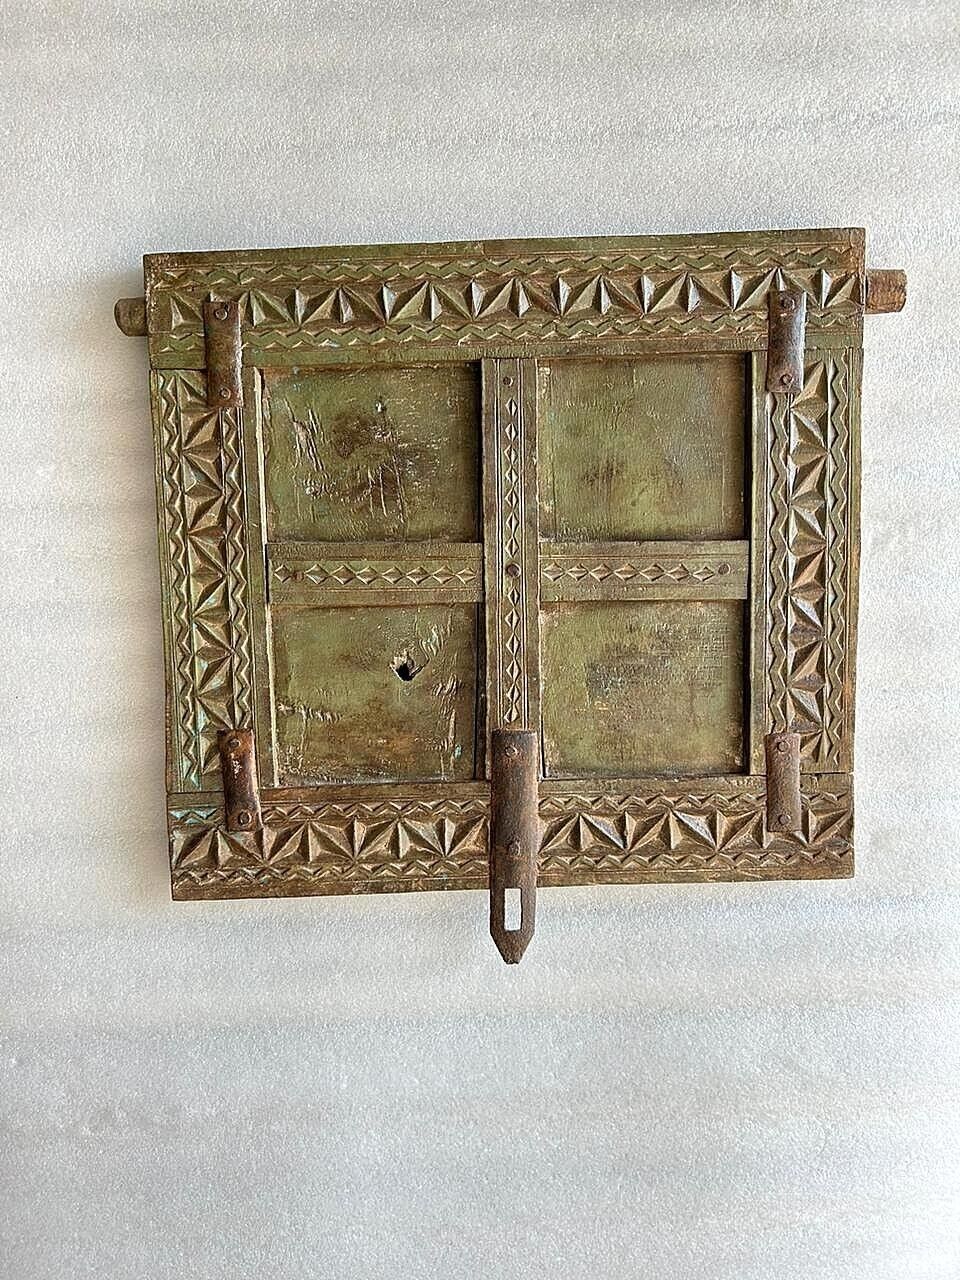 Antique Wooden Green Painted Peek Out Window Old House Window Wall Decor